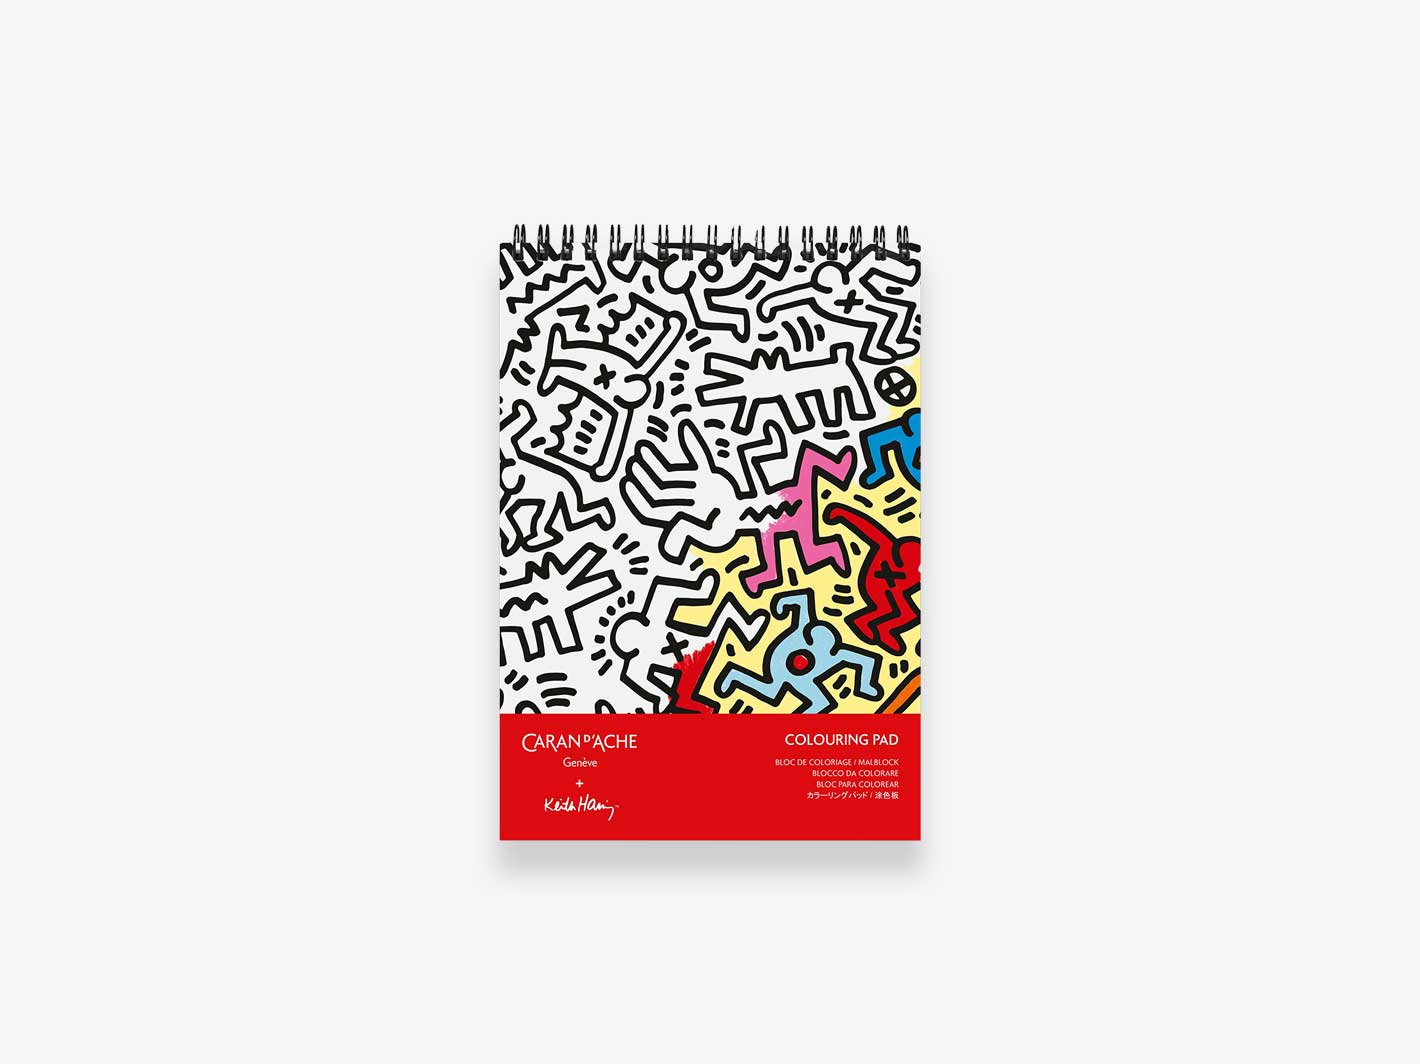 Caran dache keith haring colouring pad a misc store amsterdam